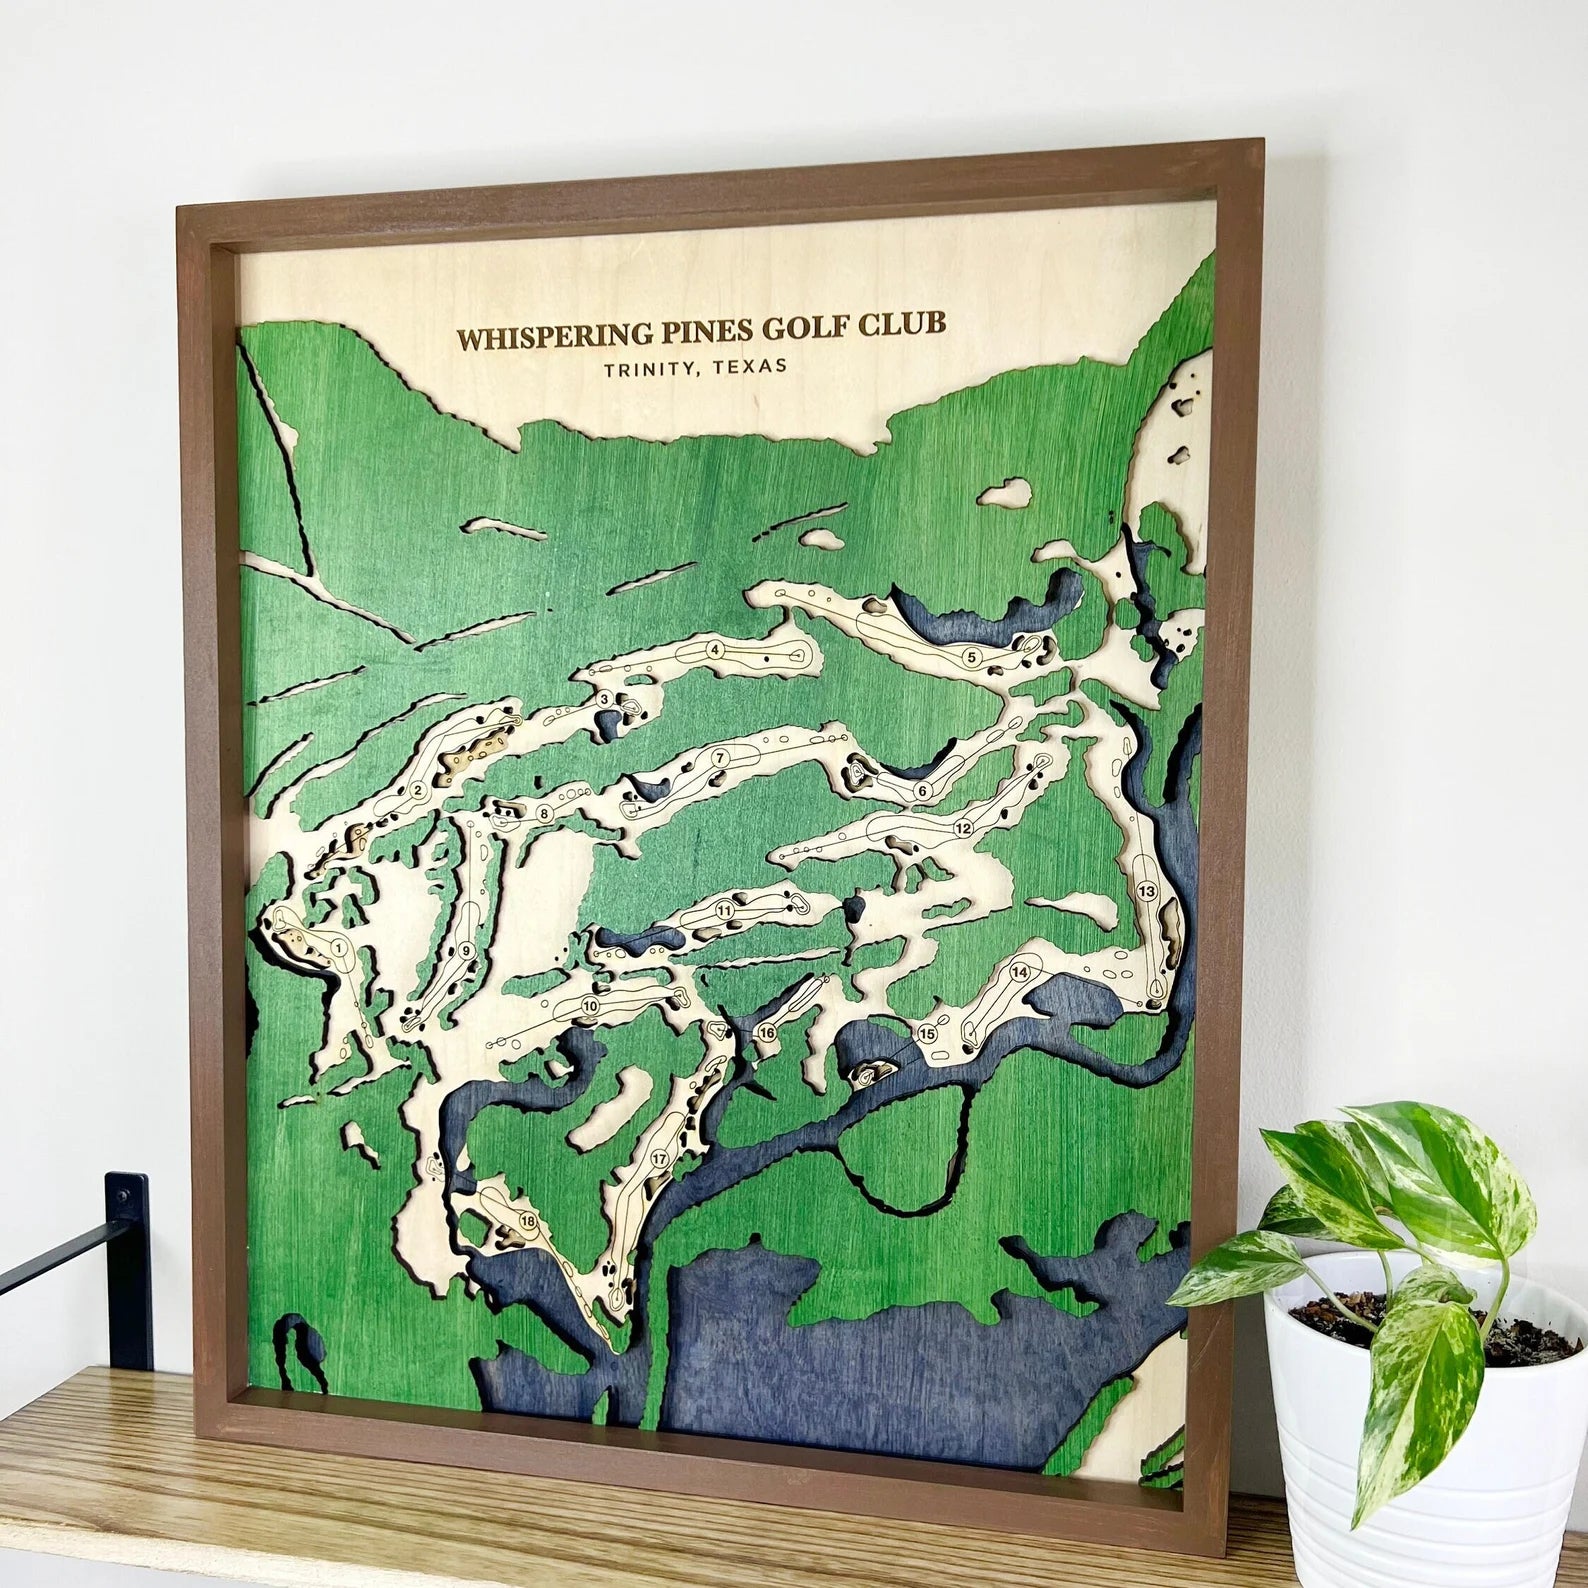 Whispering Pines Golf Club - Handmade Wood Course Map